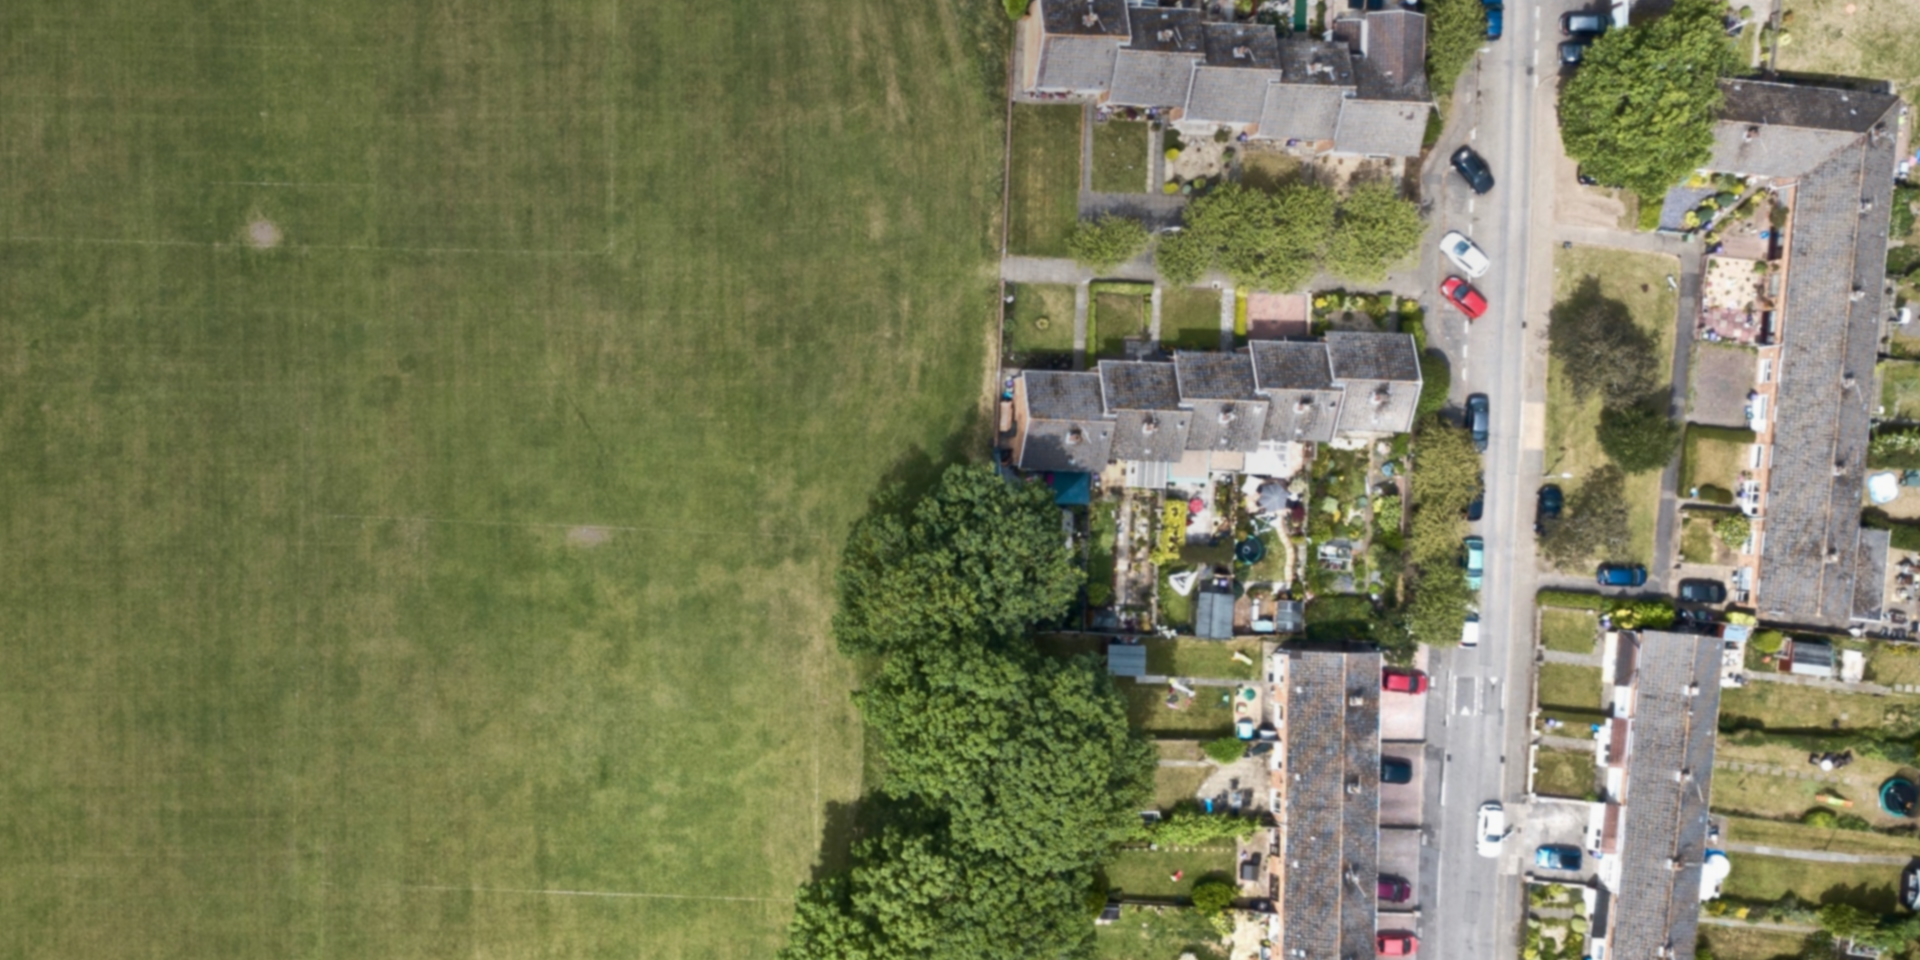 Areal image of housing estate and field